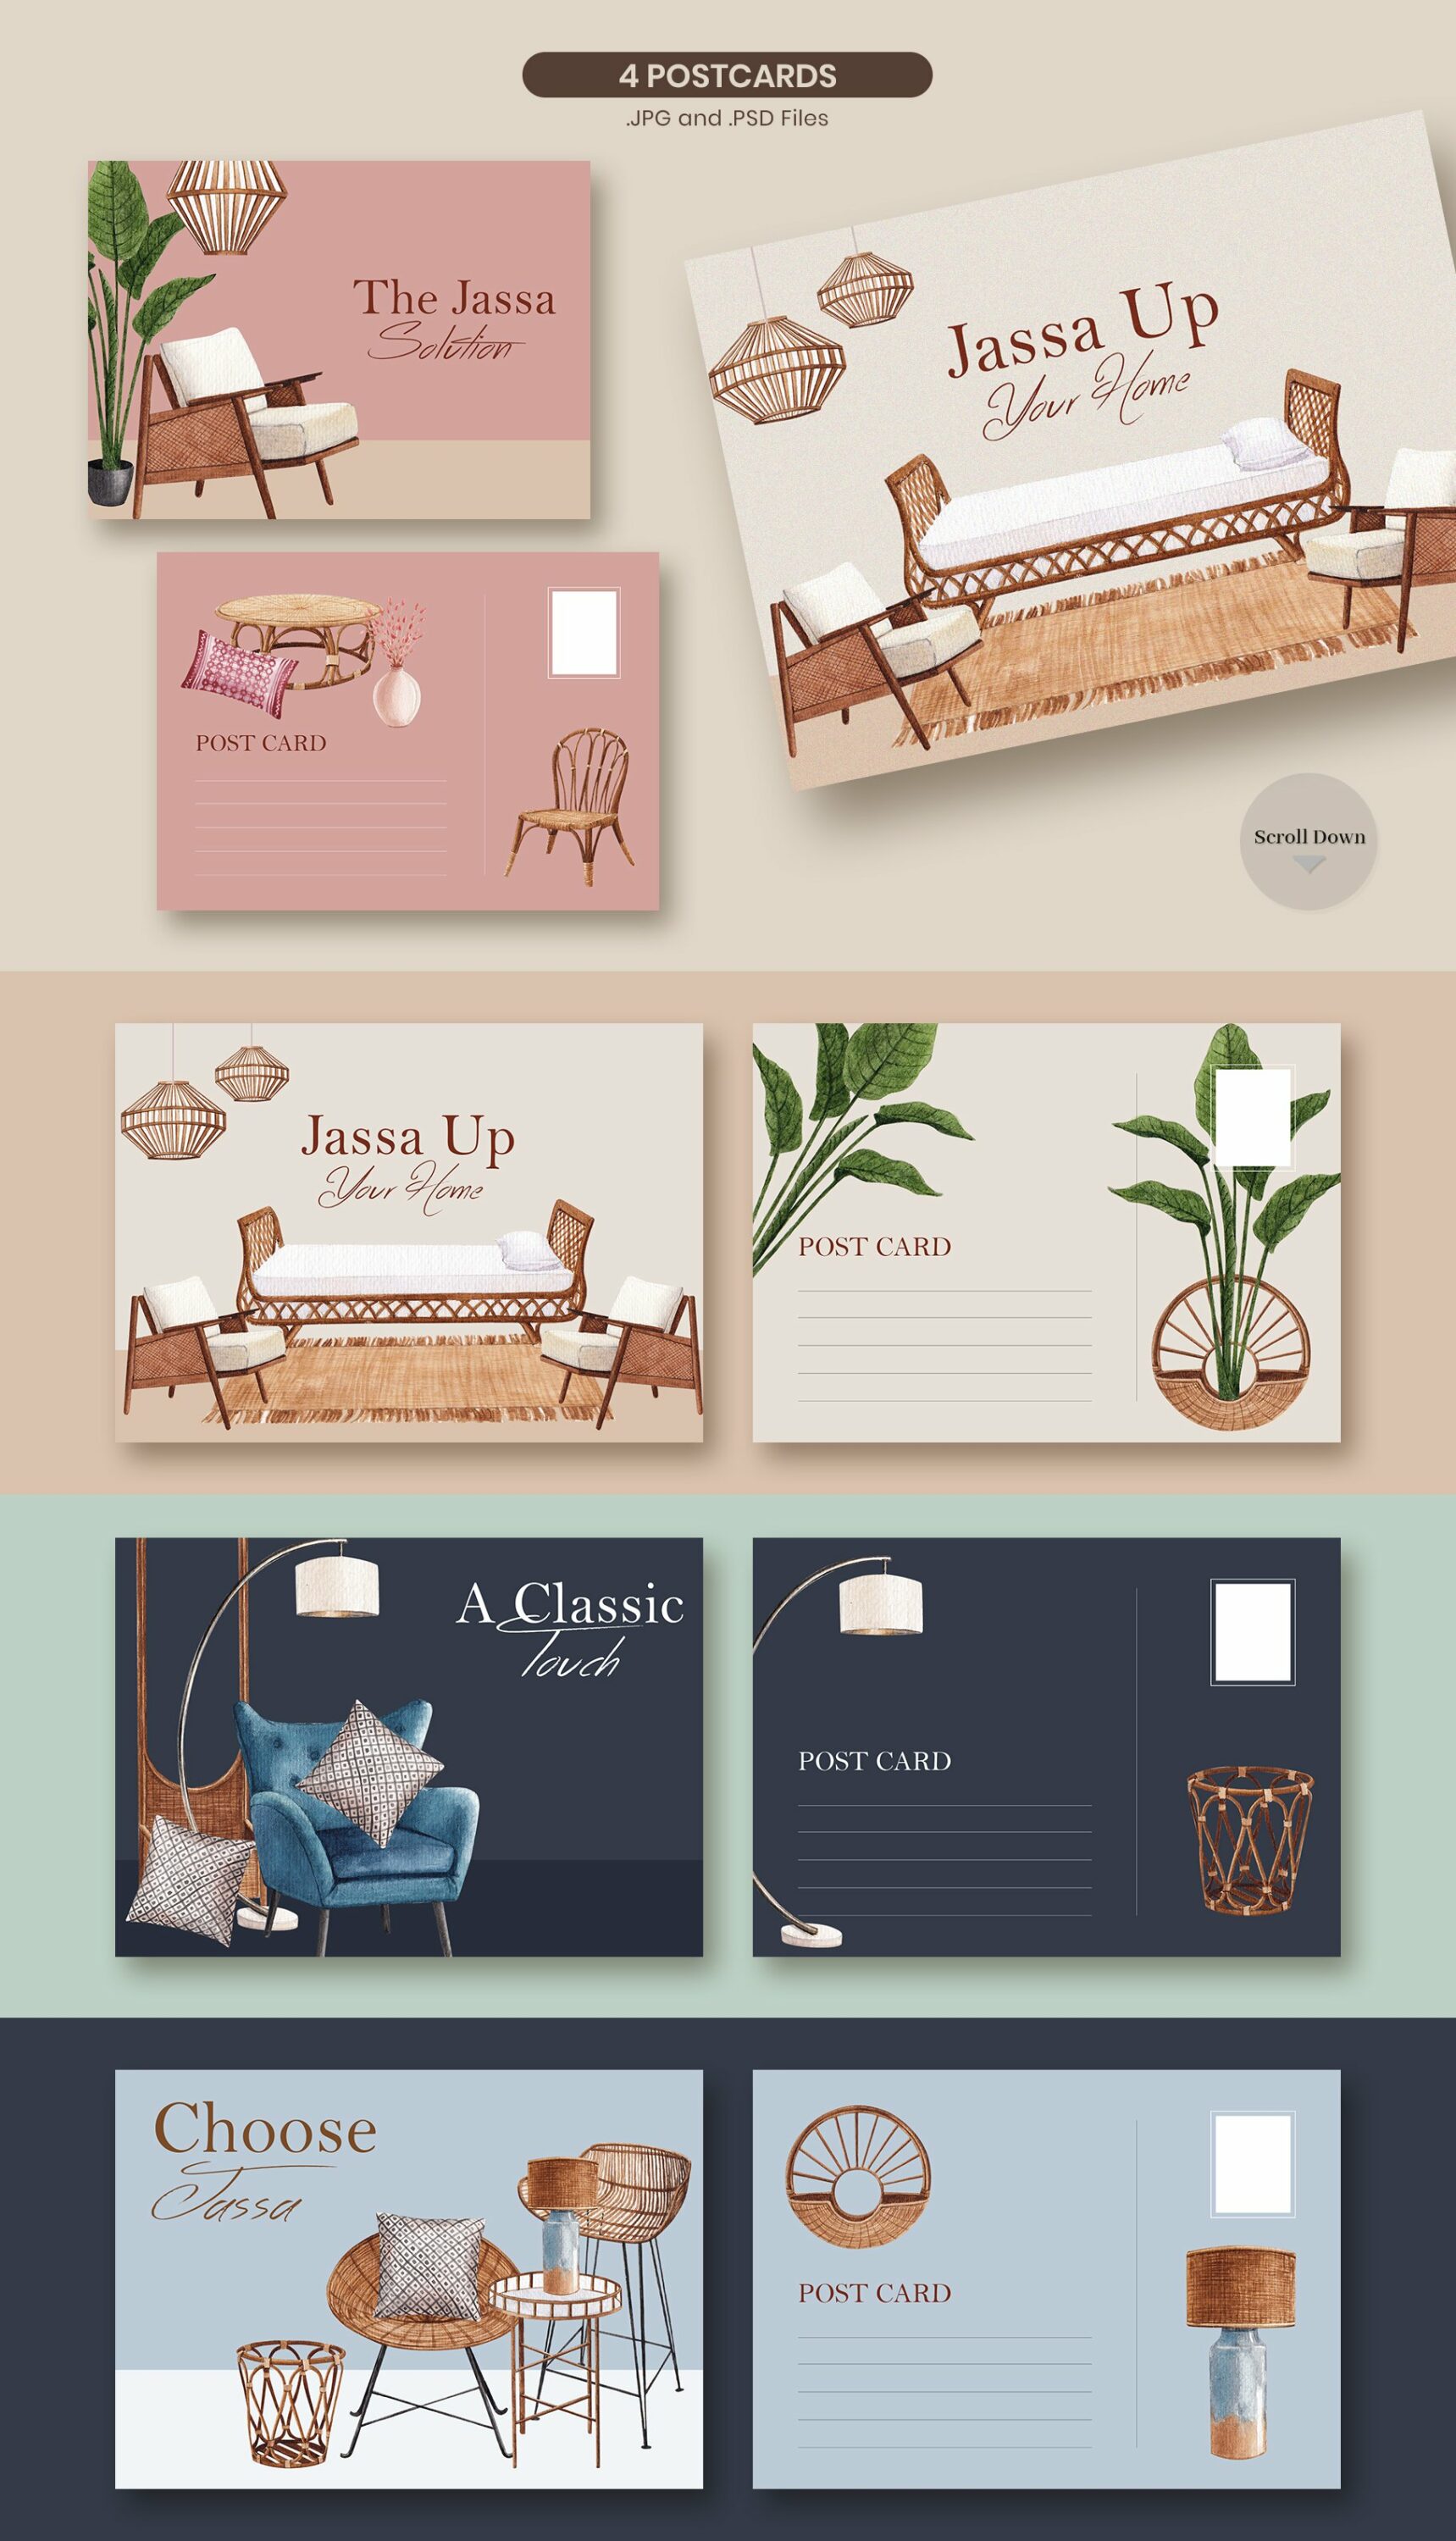 Jassa furniture postcards for special events.